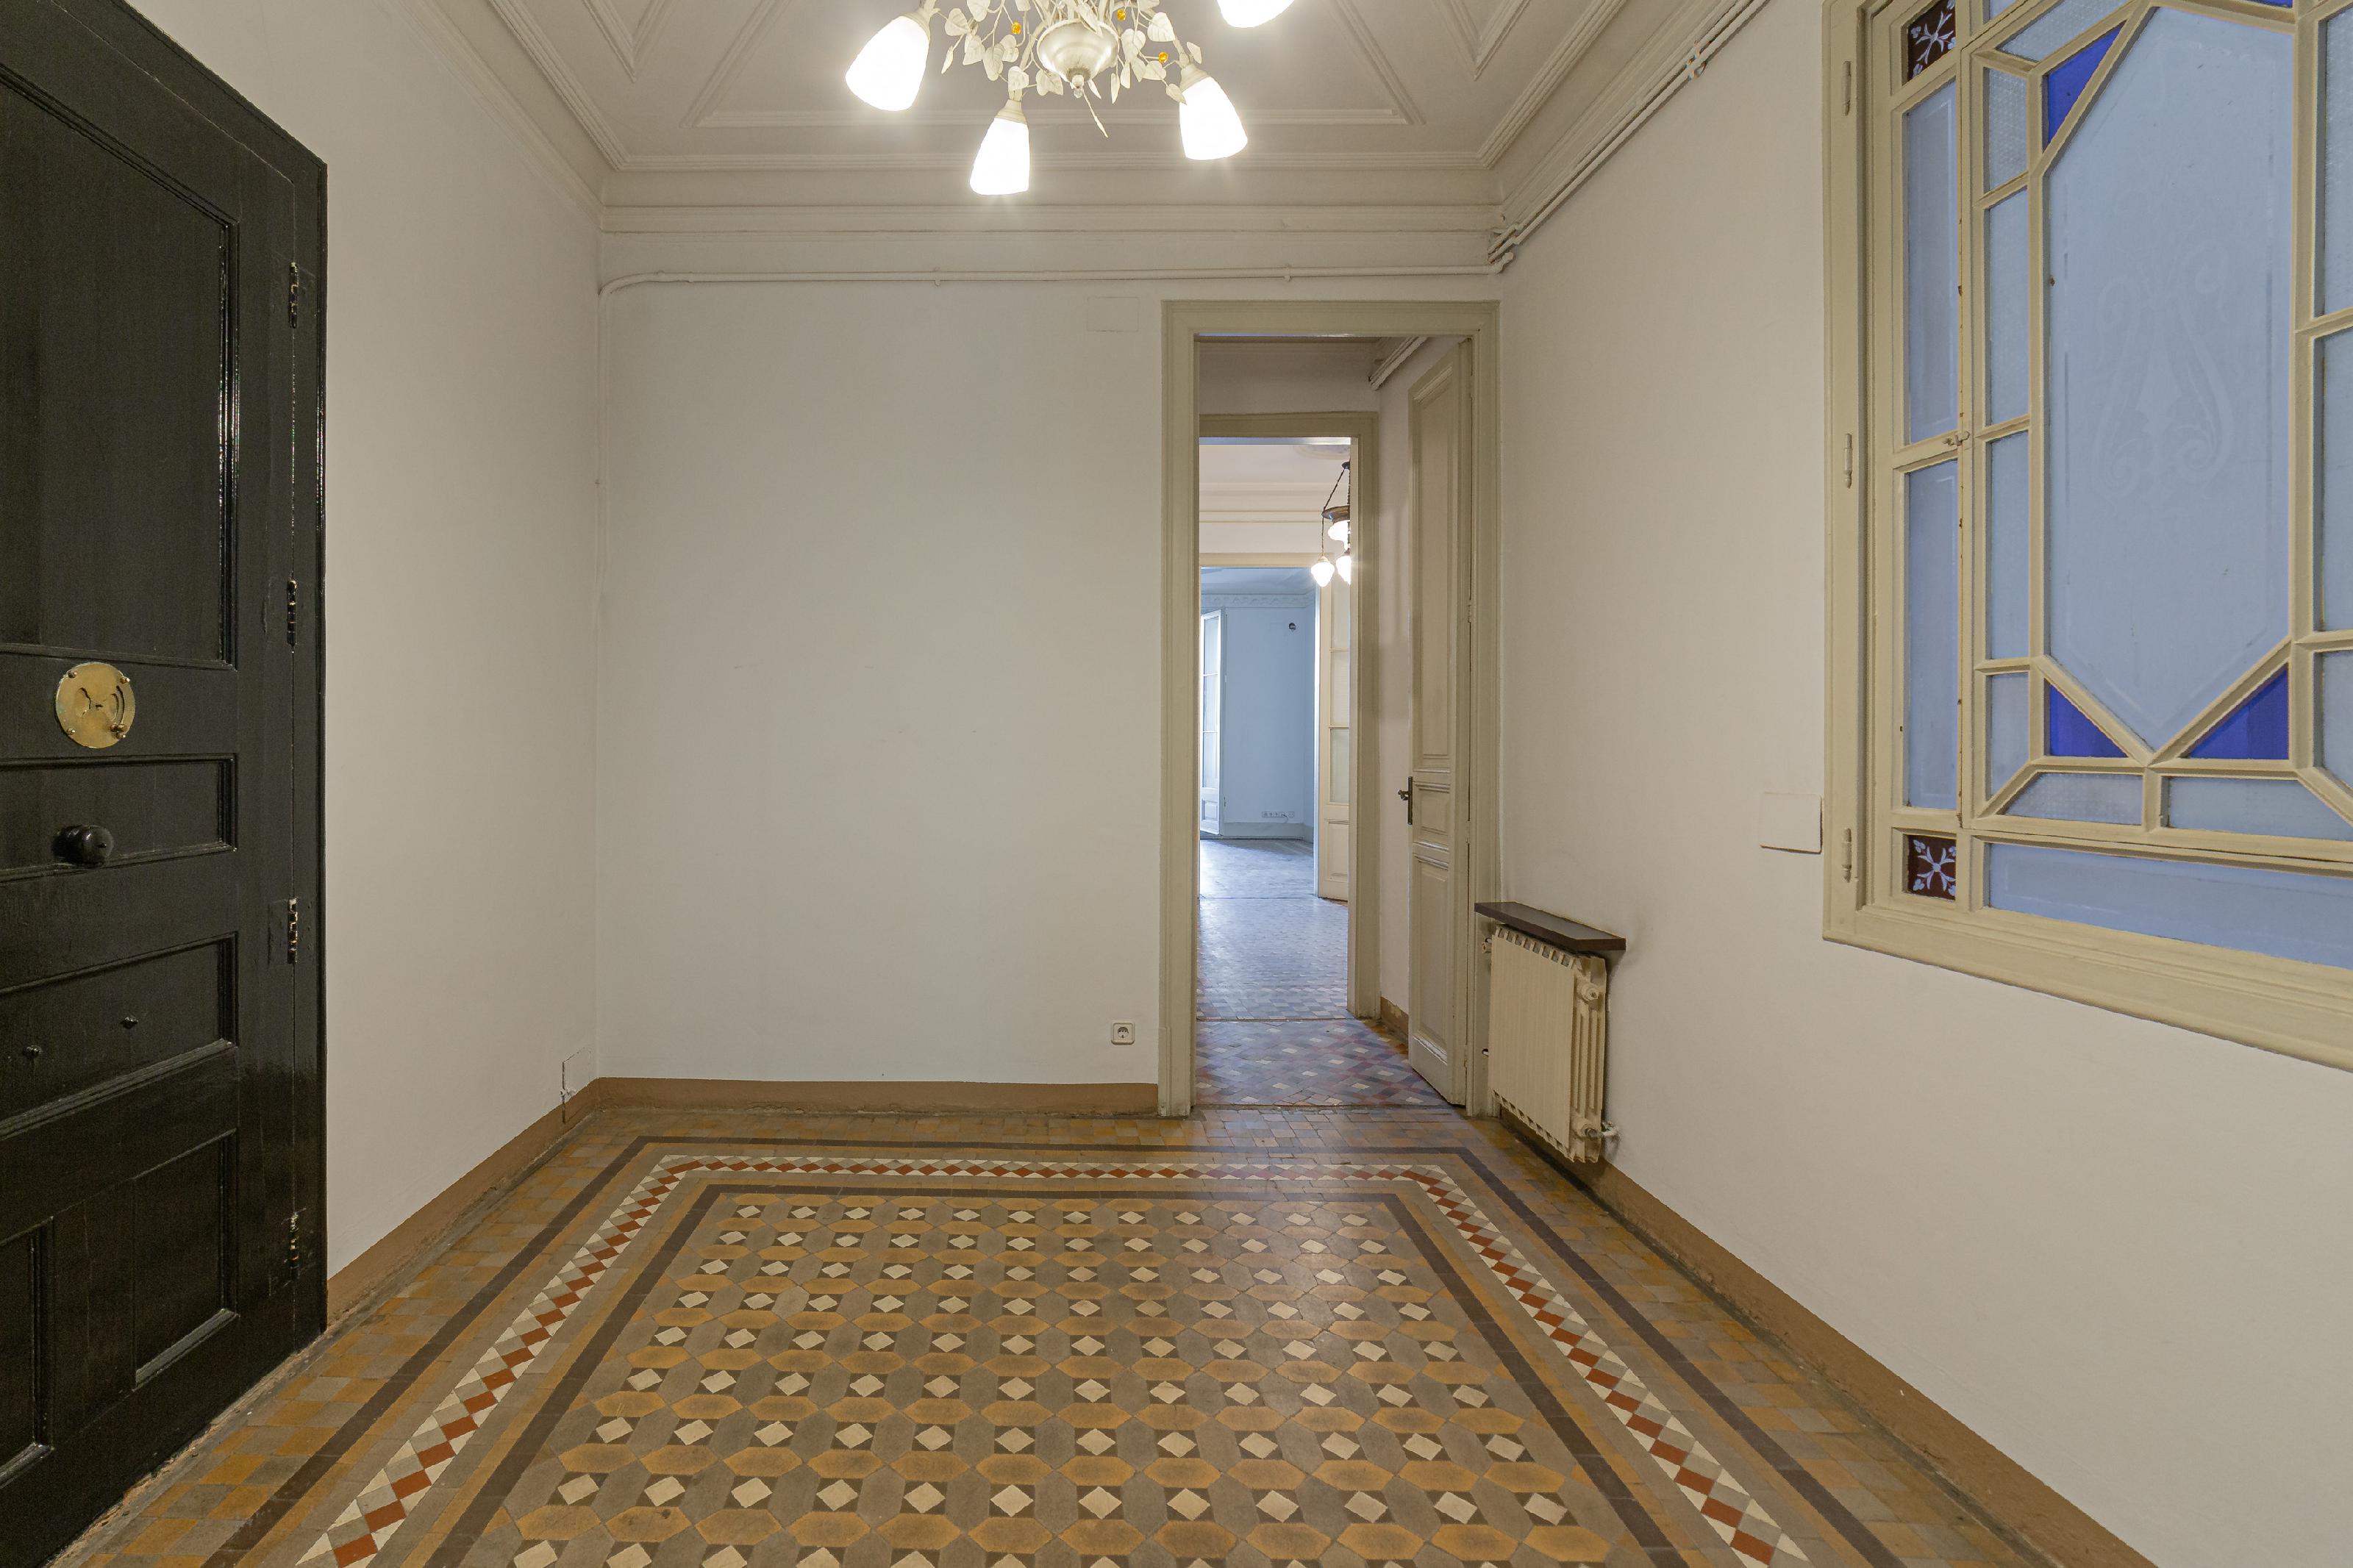 273416 Flat for sale in Eixample, Old Esquerre Eixample 23